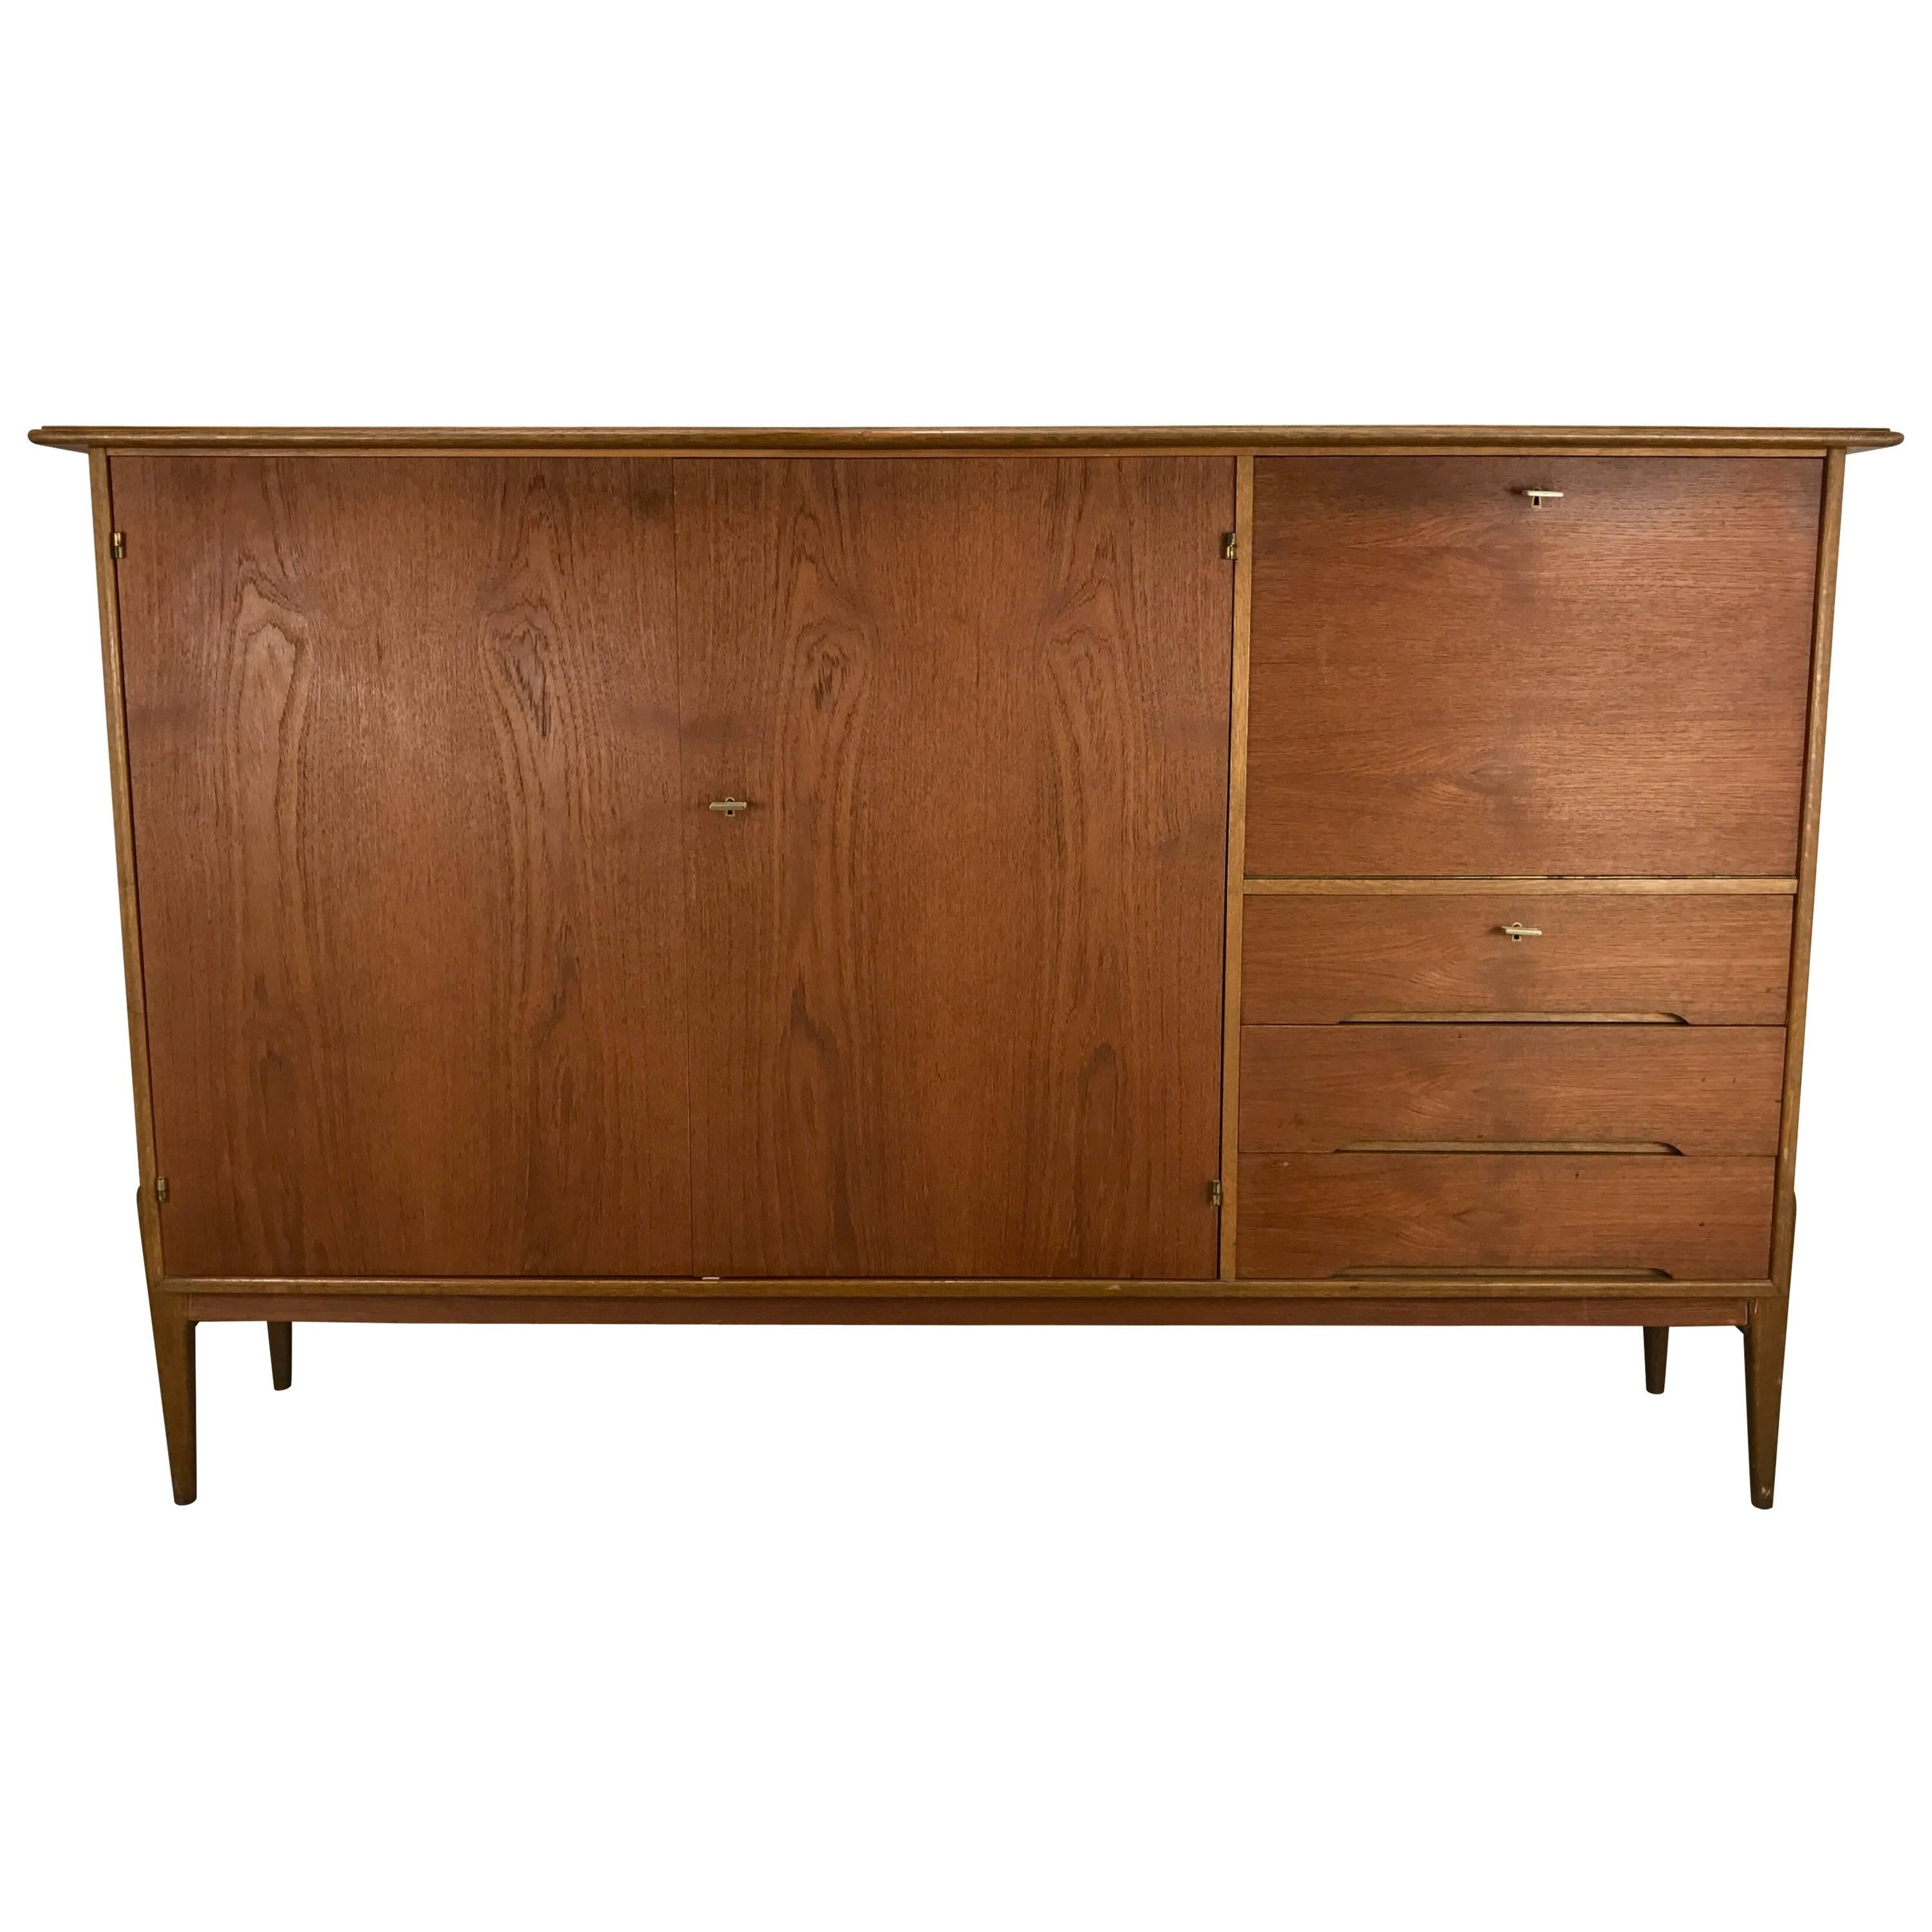 Stunning Oak and Teak Cabinet/Bar, Early Production Made in Denmark